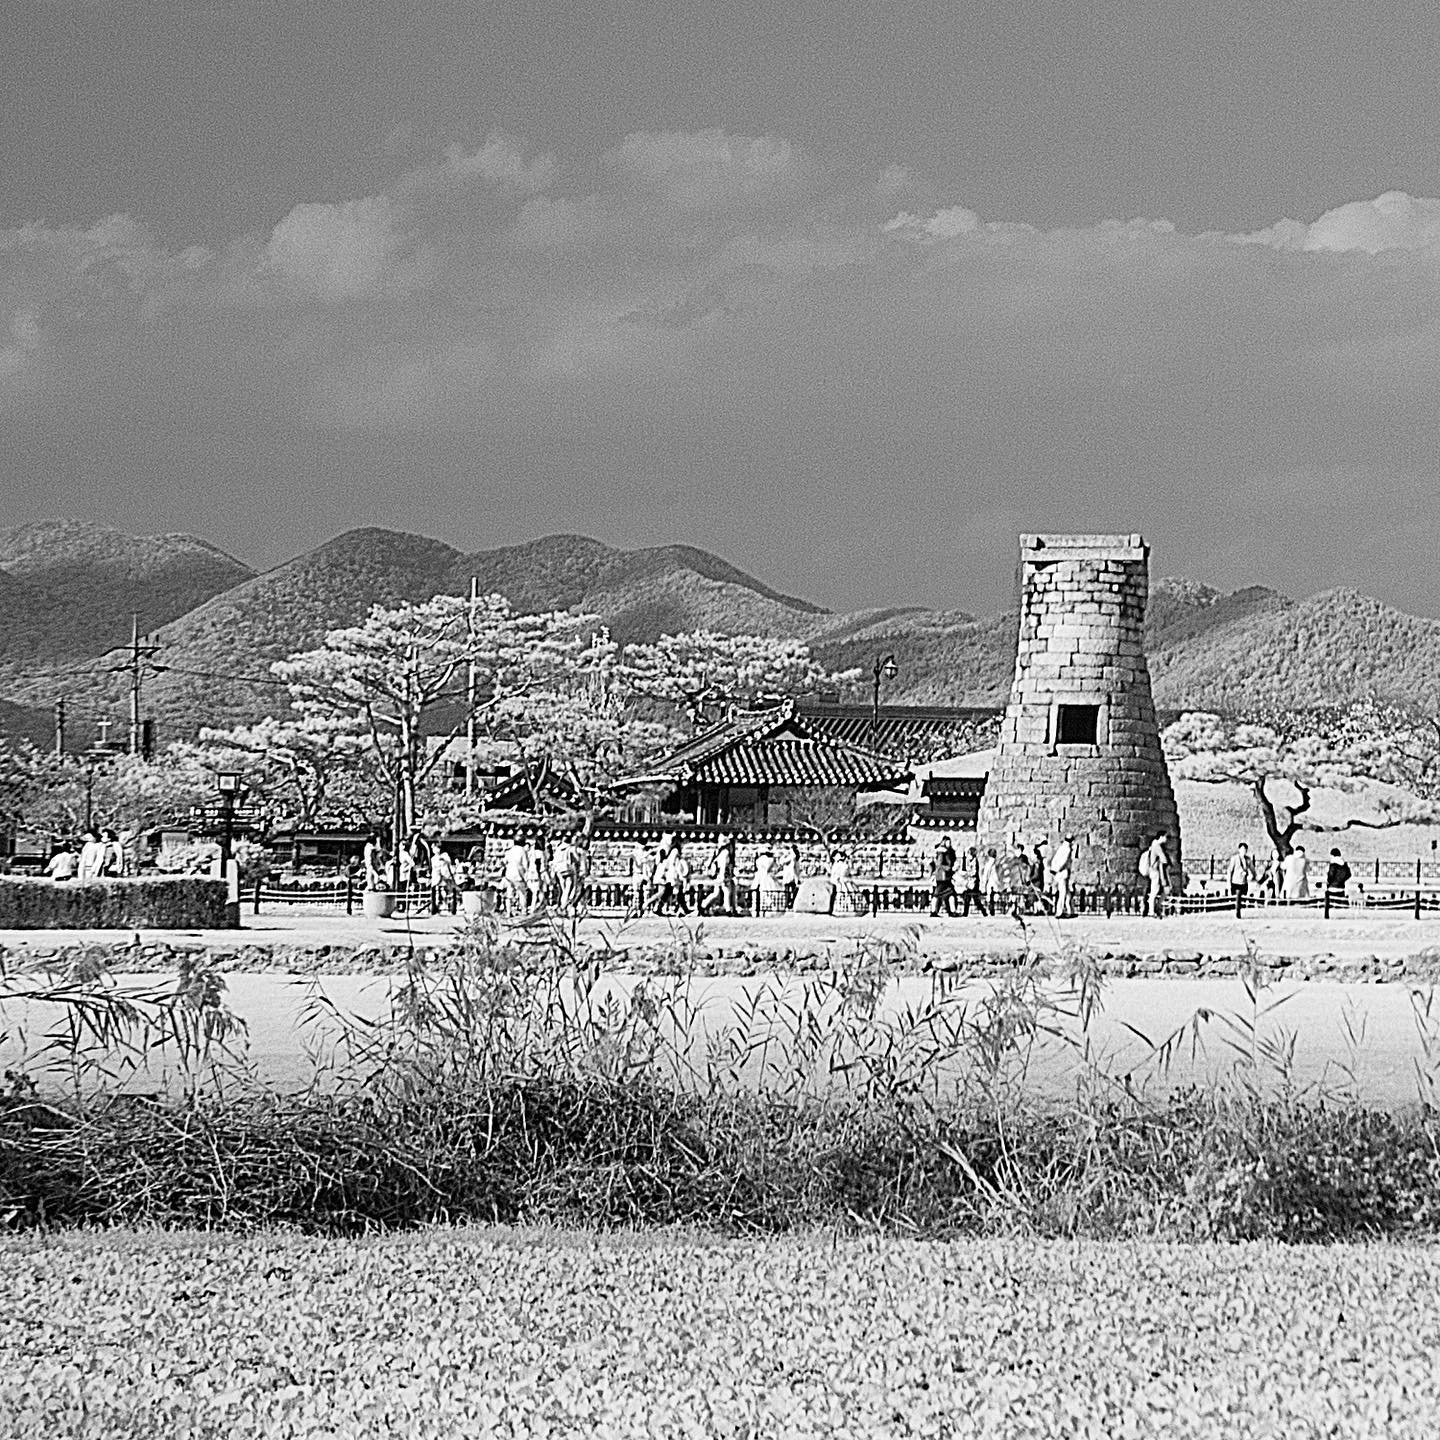 Shining new light on Silla’s moon palace 

Cheomseongdae observatory seen from Wolseong palace

#korea #nrich #koreanheritage #kheritage #koreatreasure #korearesesarch #heritagekr #kculture

Copyright 2022. NRICH all rights reserved.